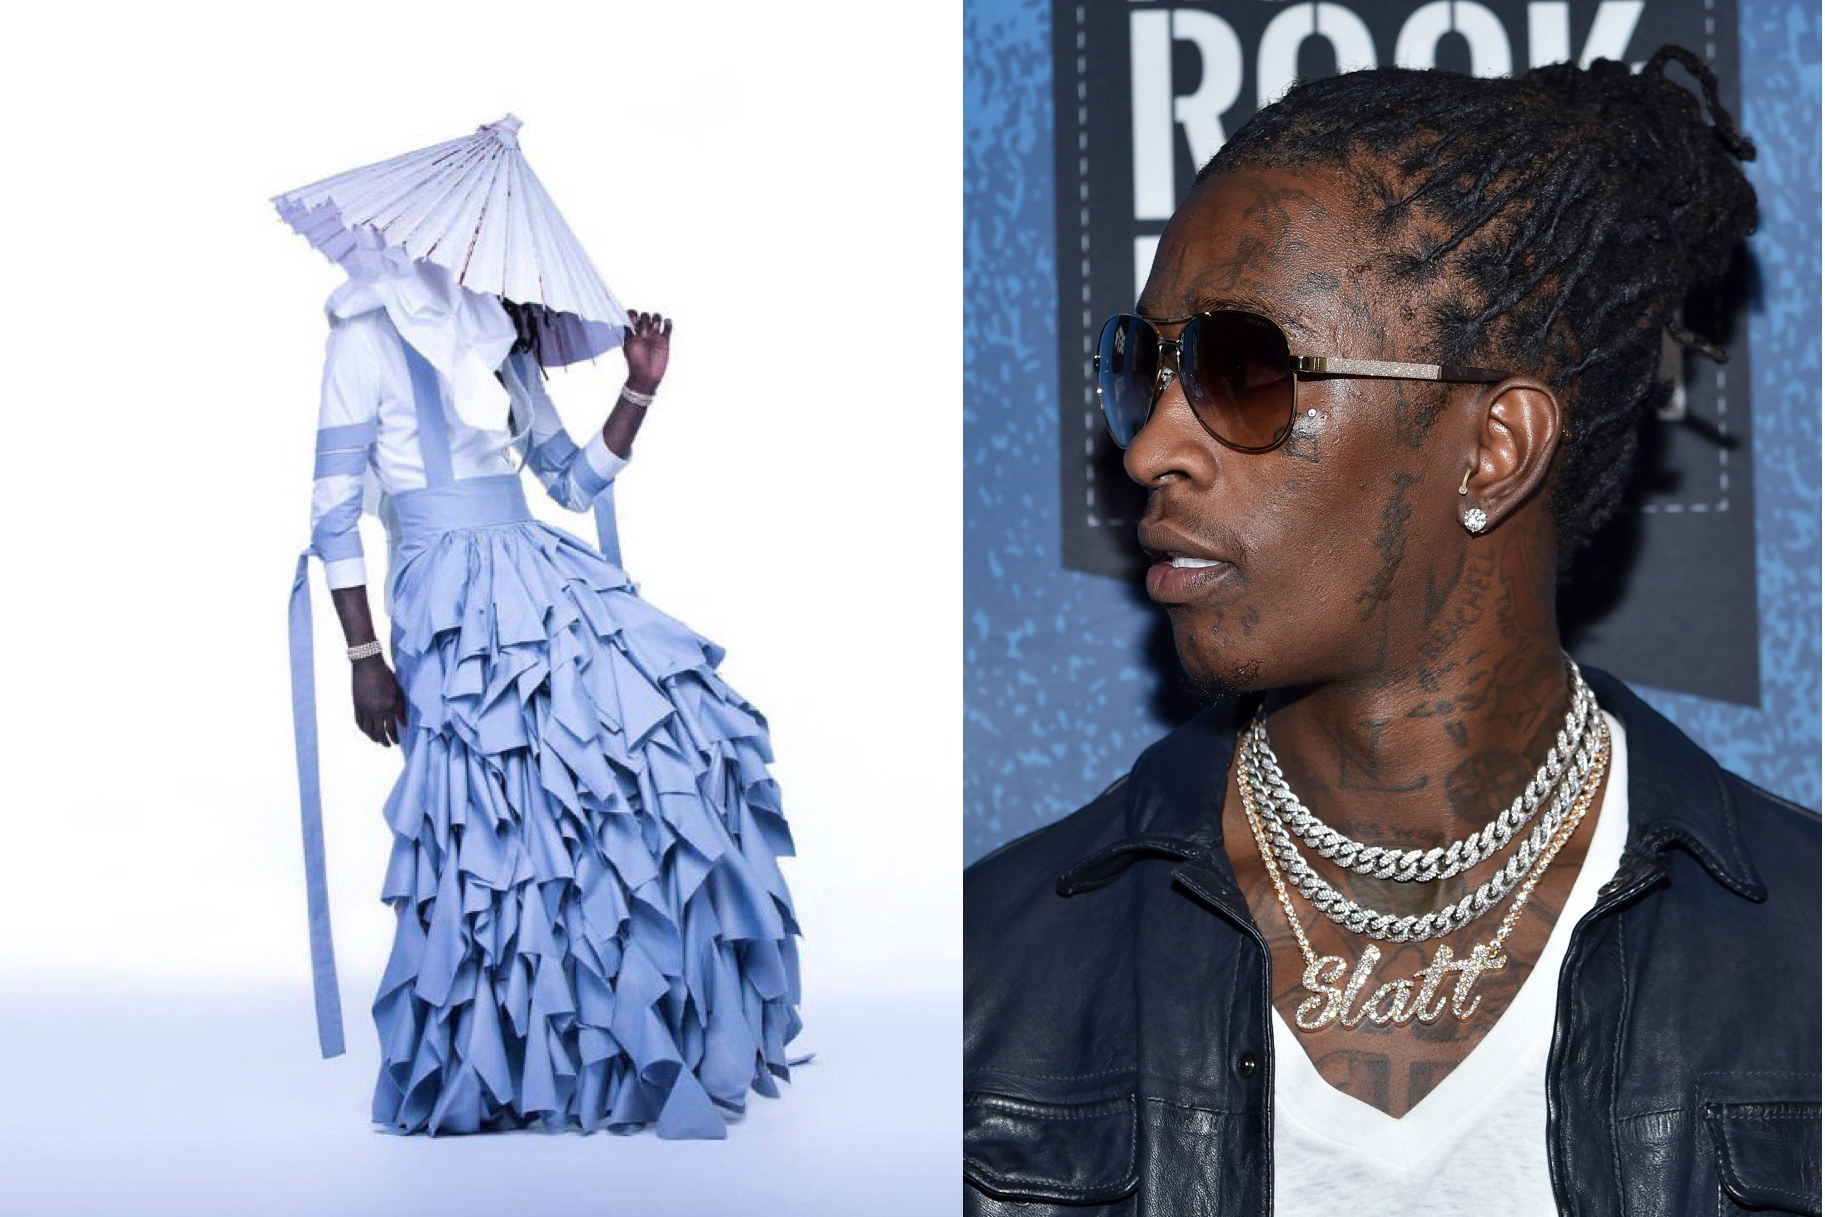 Young Thug's In A Dress For His Album Cover, And Everyone Has An Opinion | Very Real